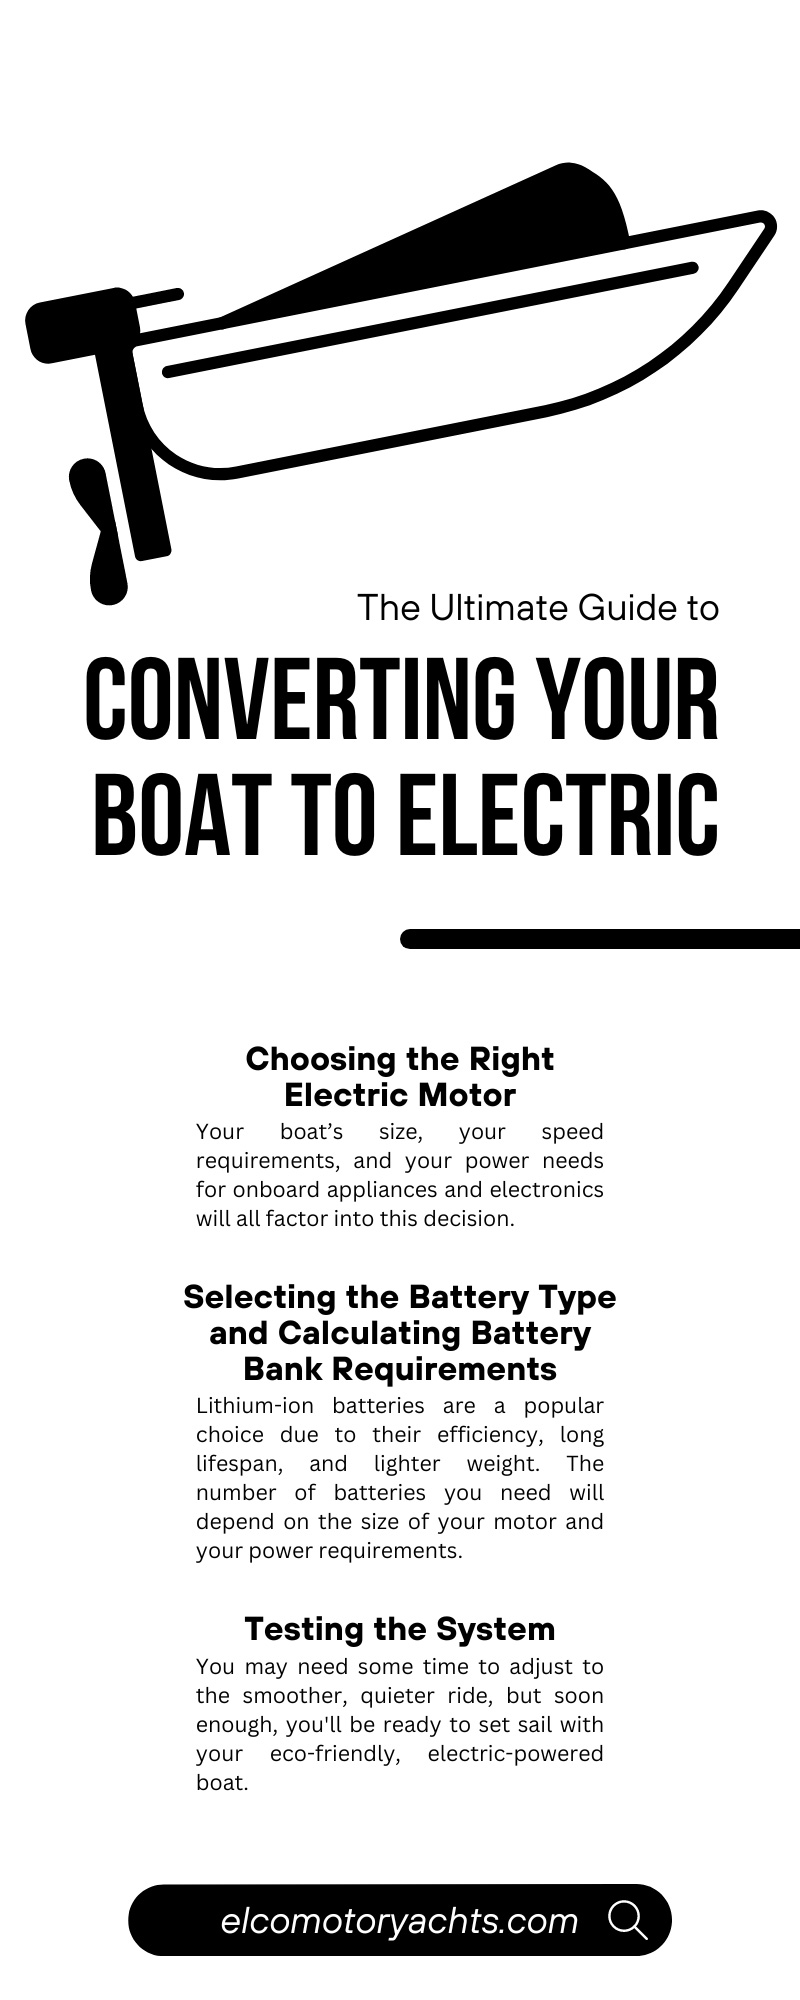 The Ultimate Guide to Converting Your Boat to Electric